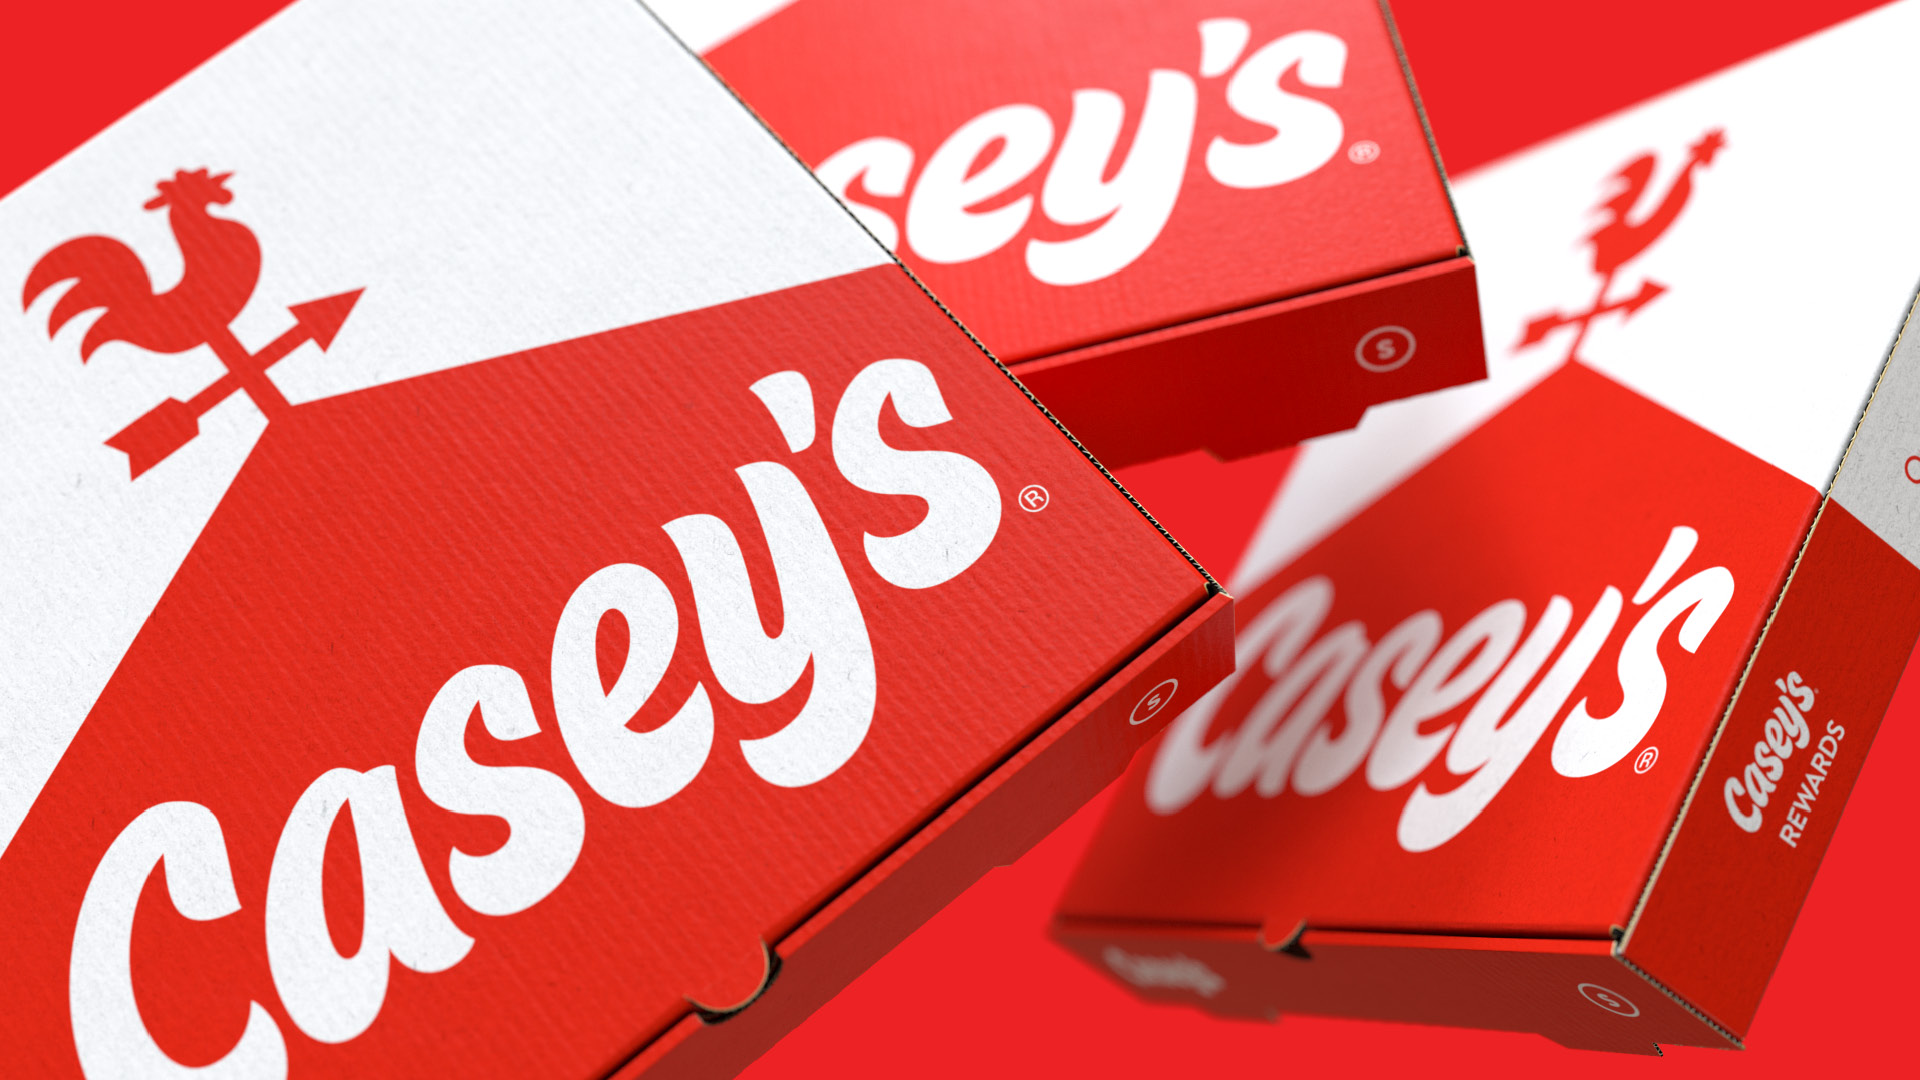 Casey's branded pizza boxes 